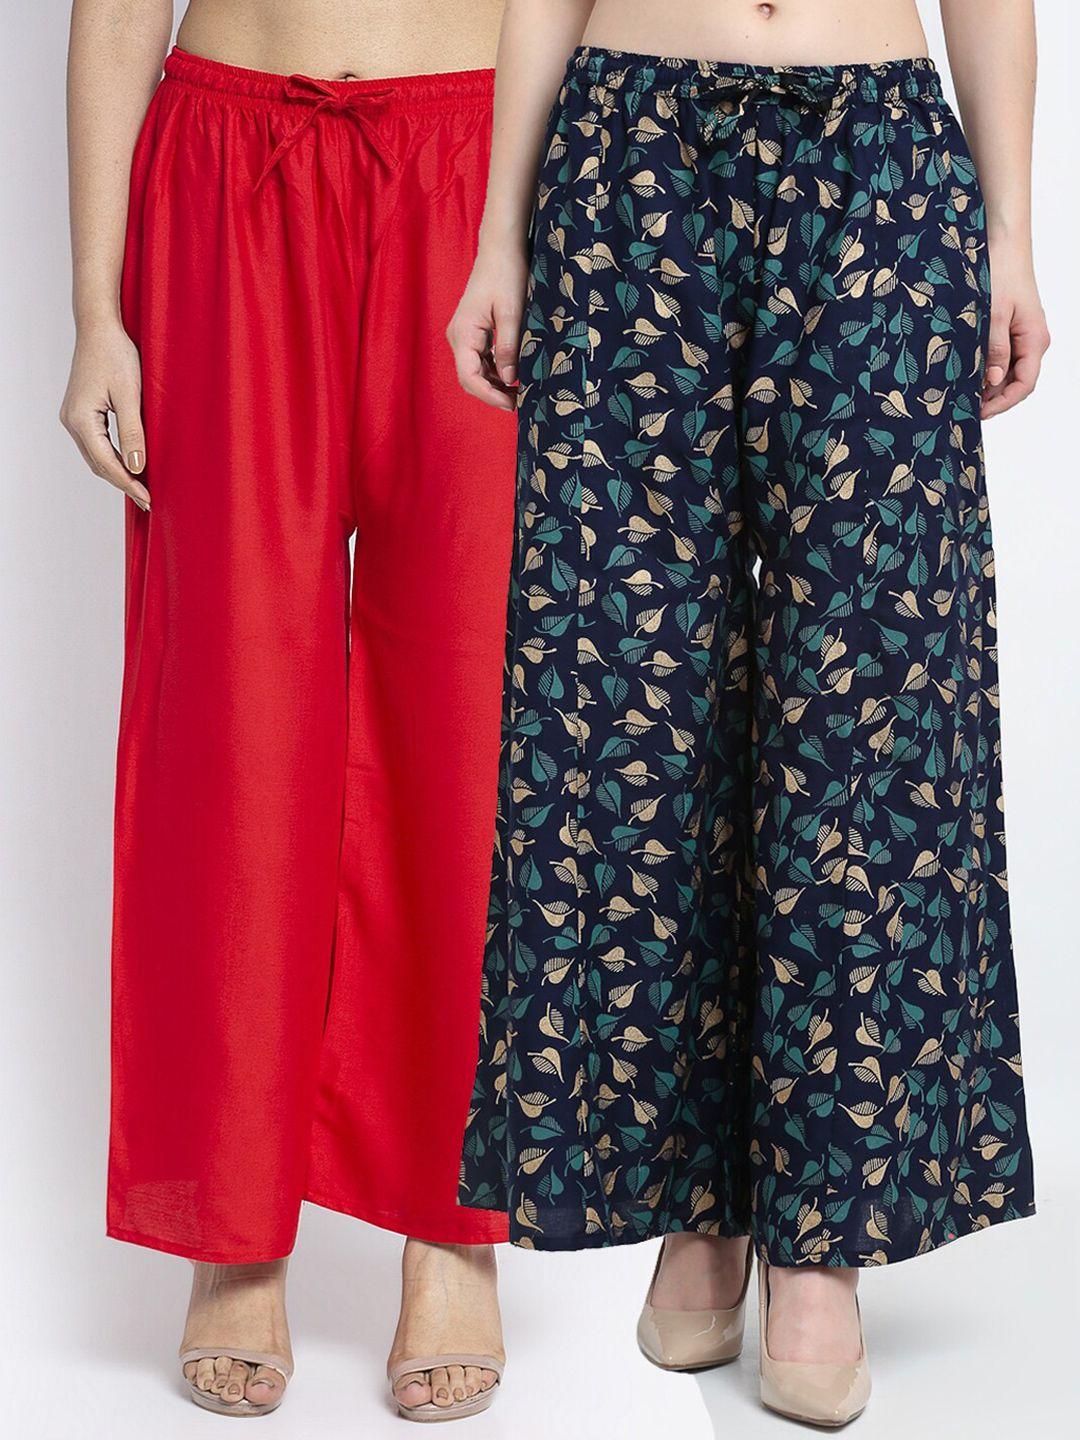 gracit women set of 2 red & navy blue printed palazzos